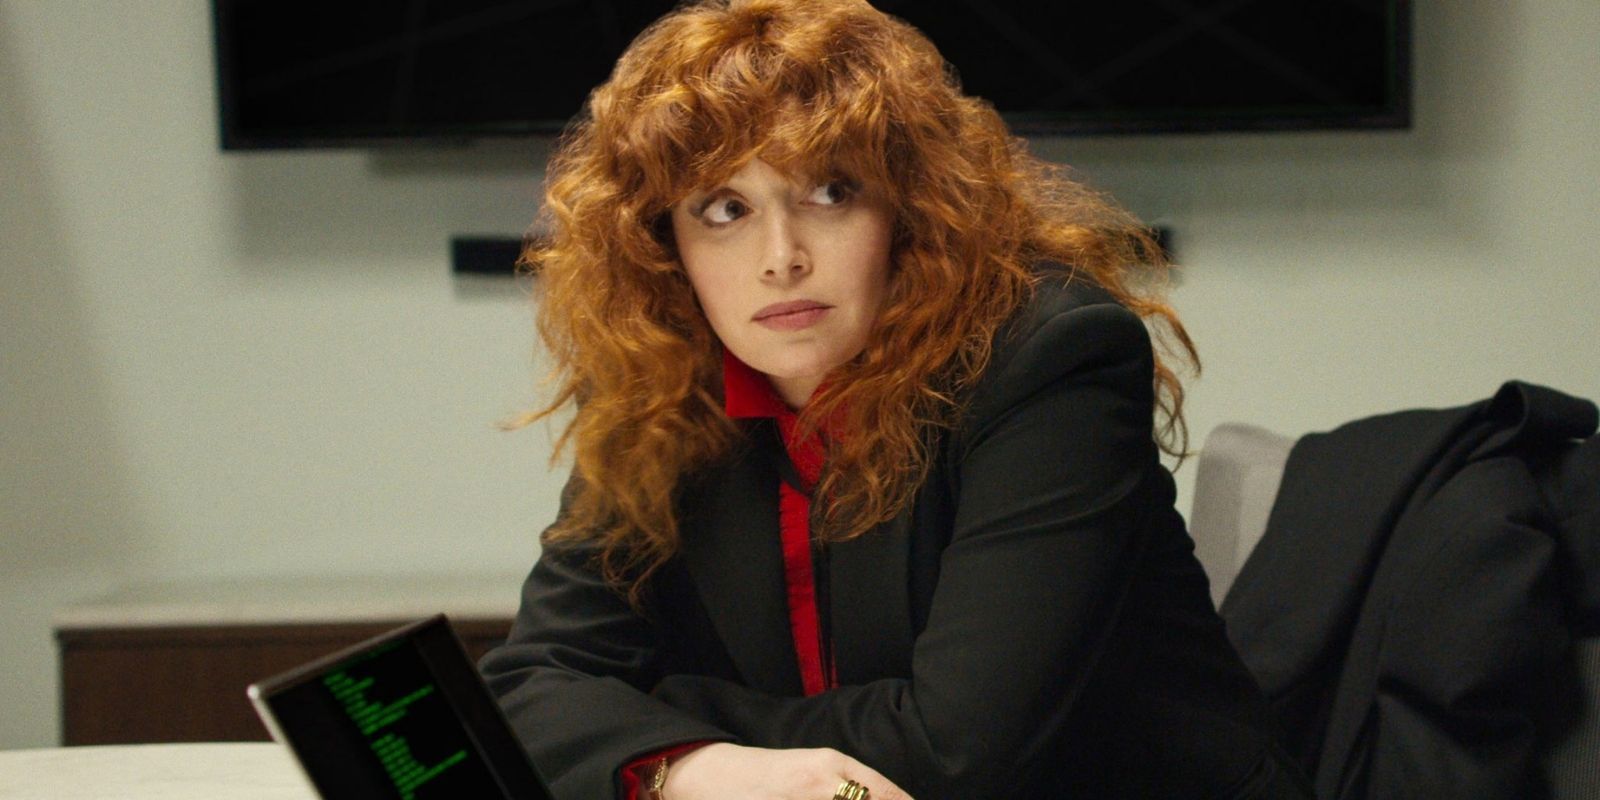 Nadia in the office in Russian Doll.